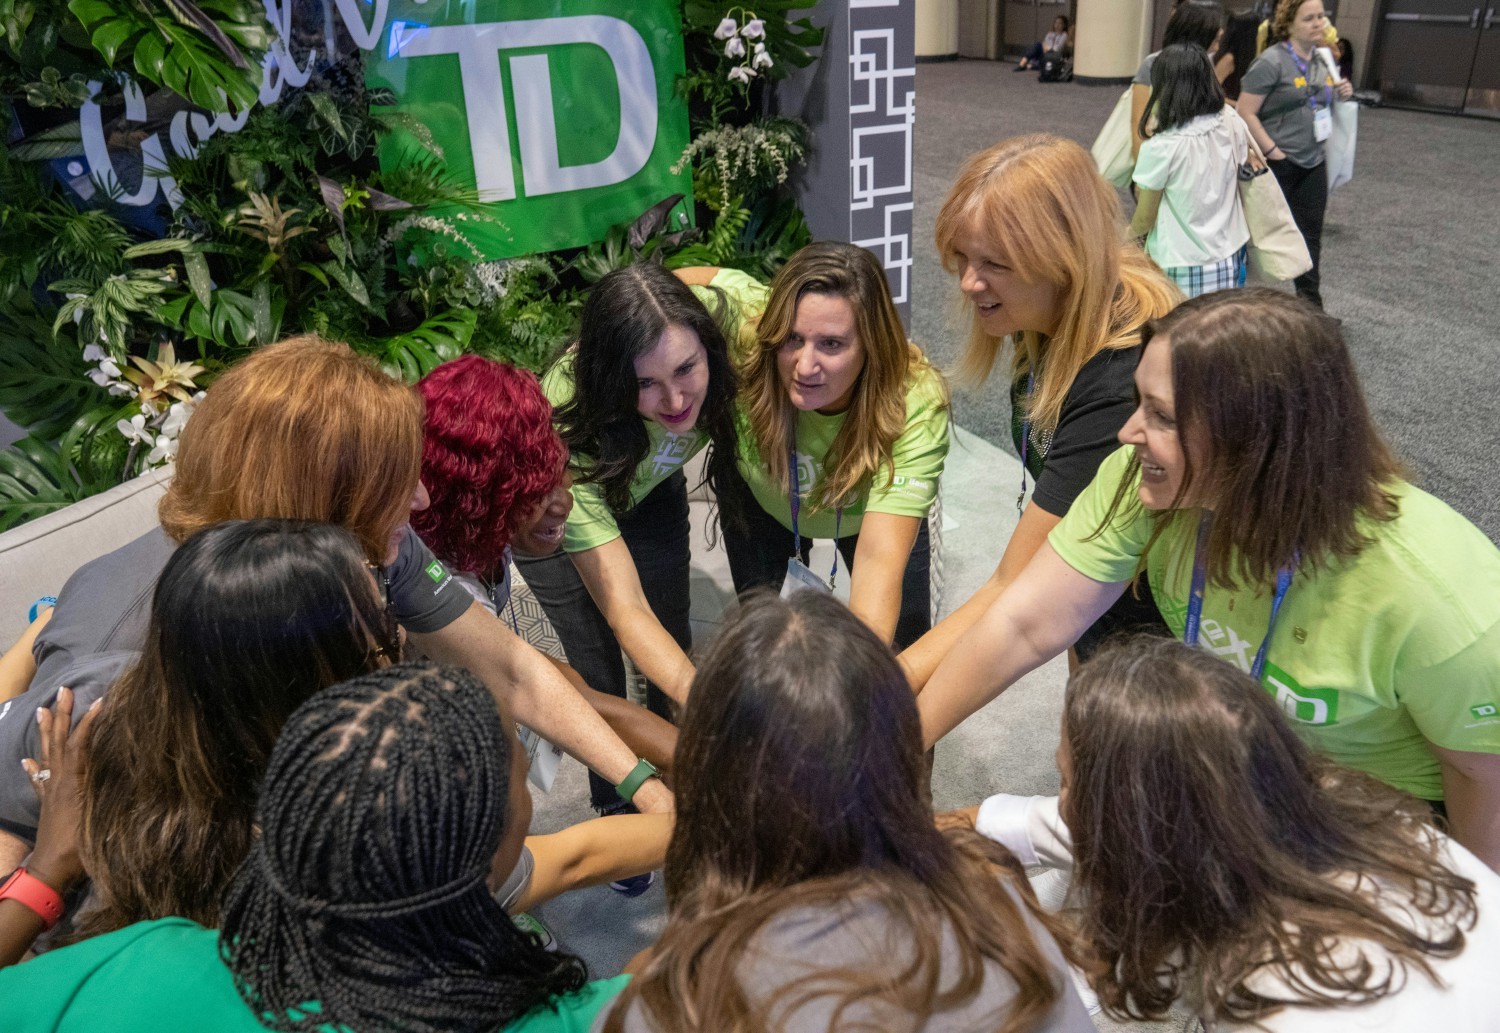 Caring colleagues and supportive leaders make TD an Unexpectedly Human place to work